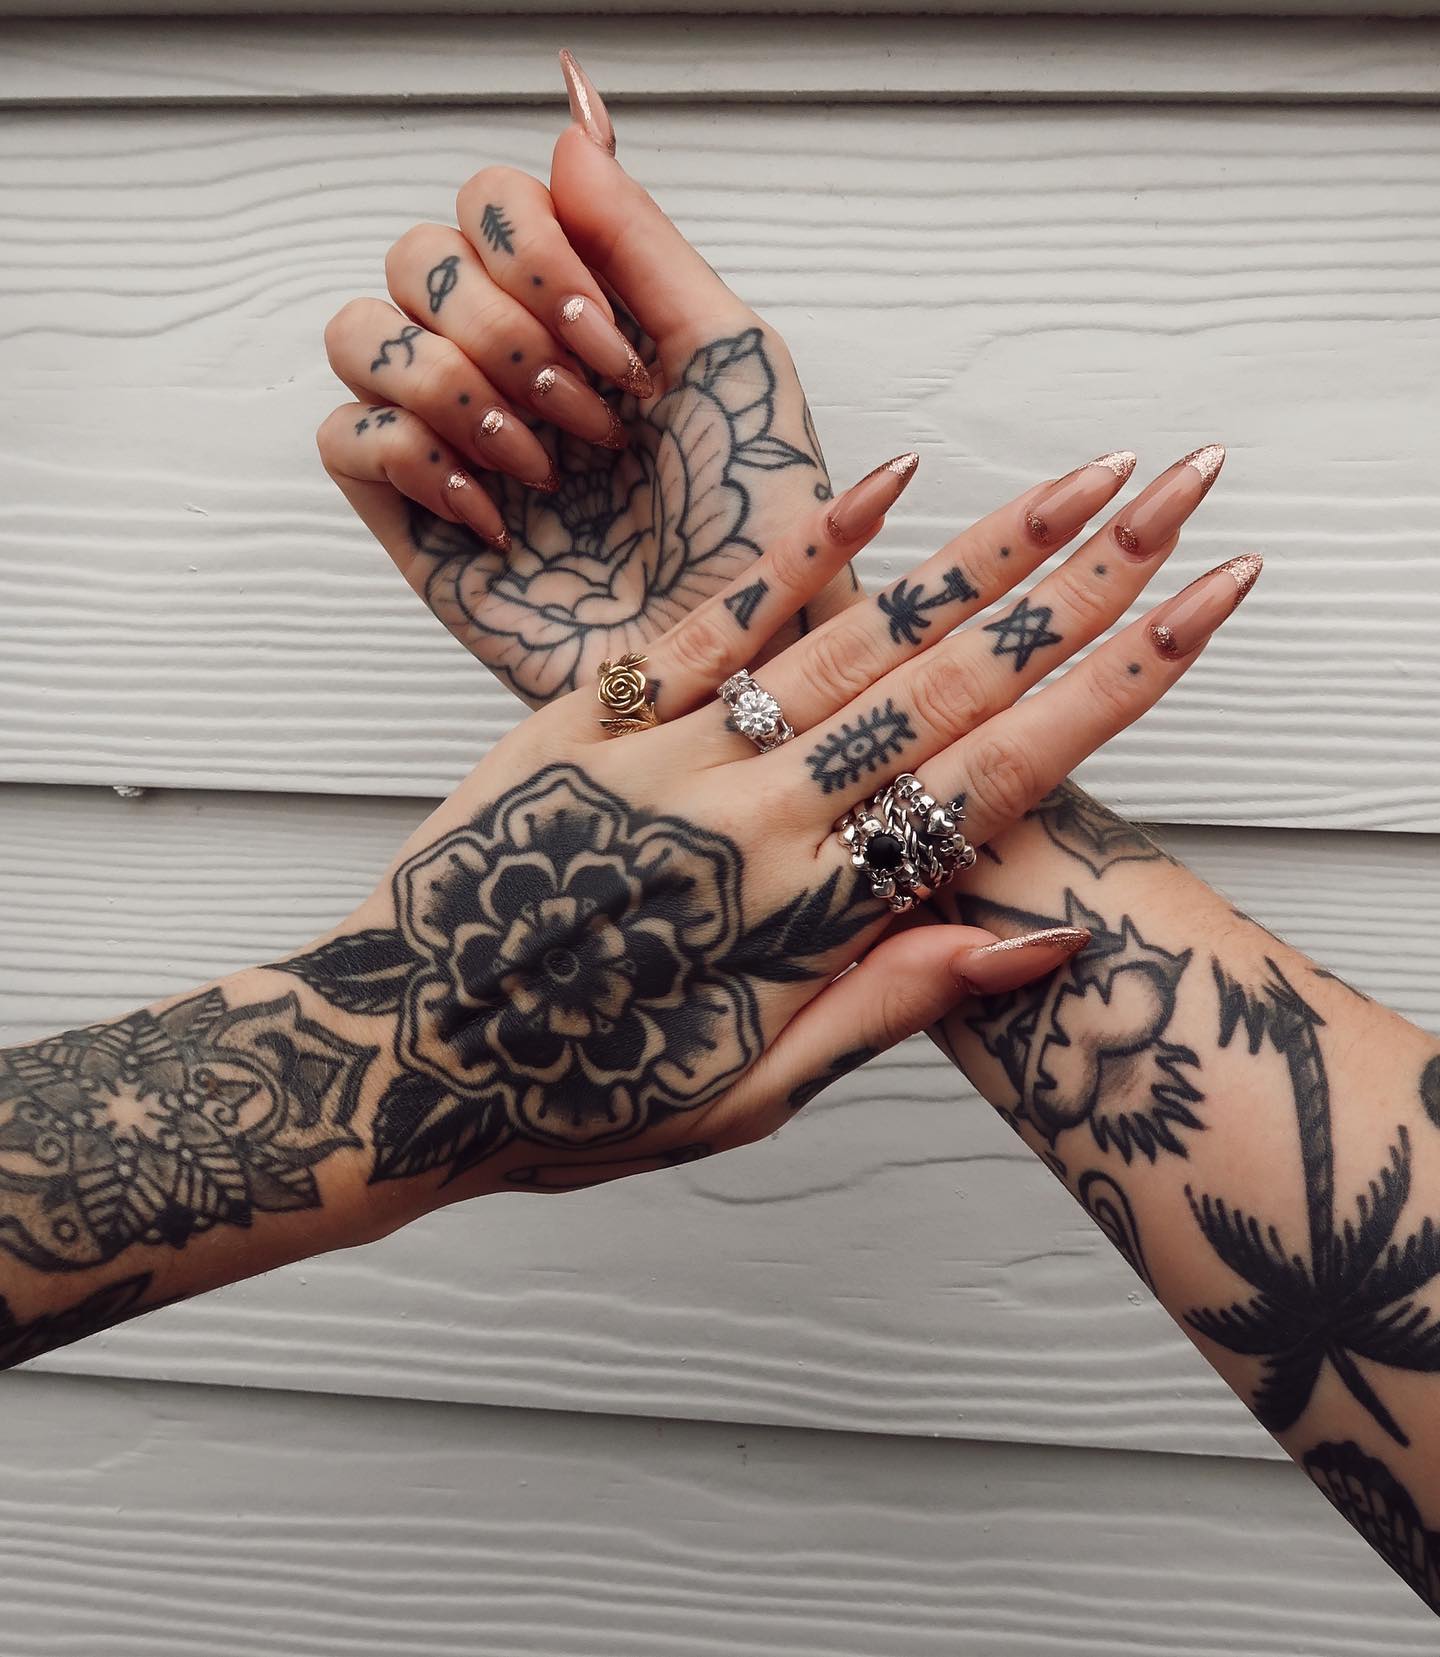 55 Best Patchwork Tattoos An Exploration of the Most Creative Tattoo Trend